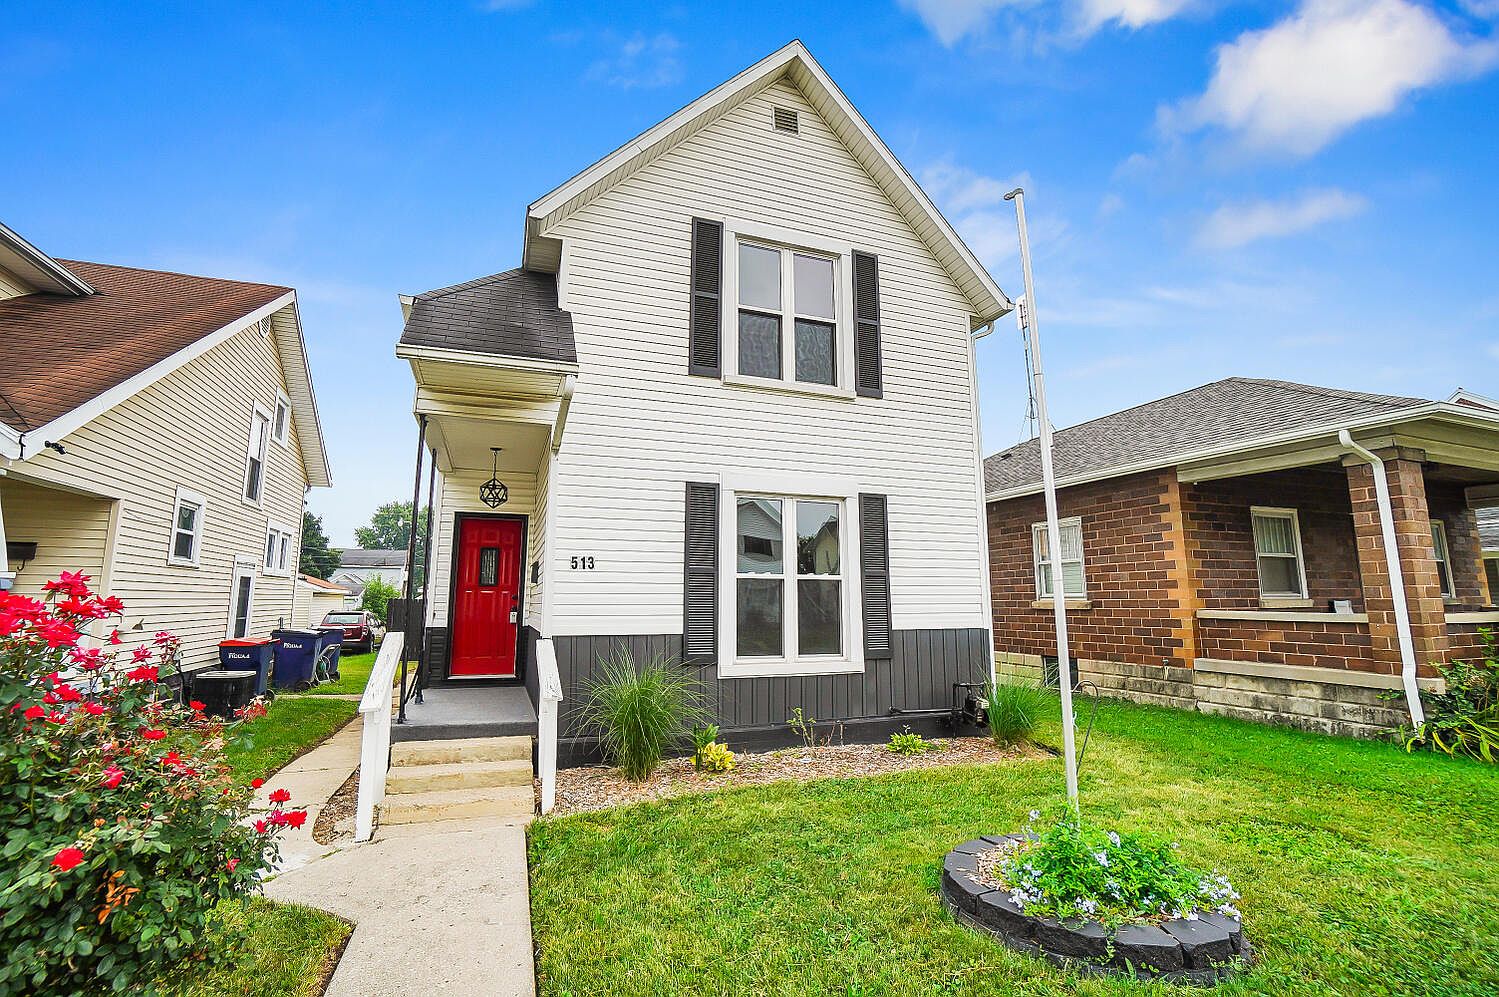 513 Boal Ave, Piqua, OH 45356 | Zillow